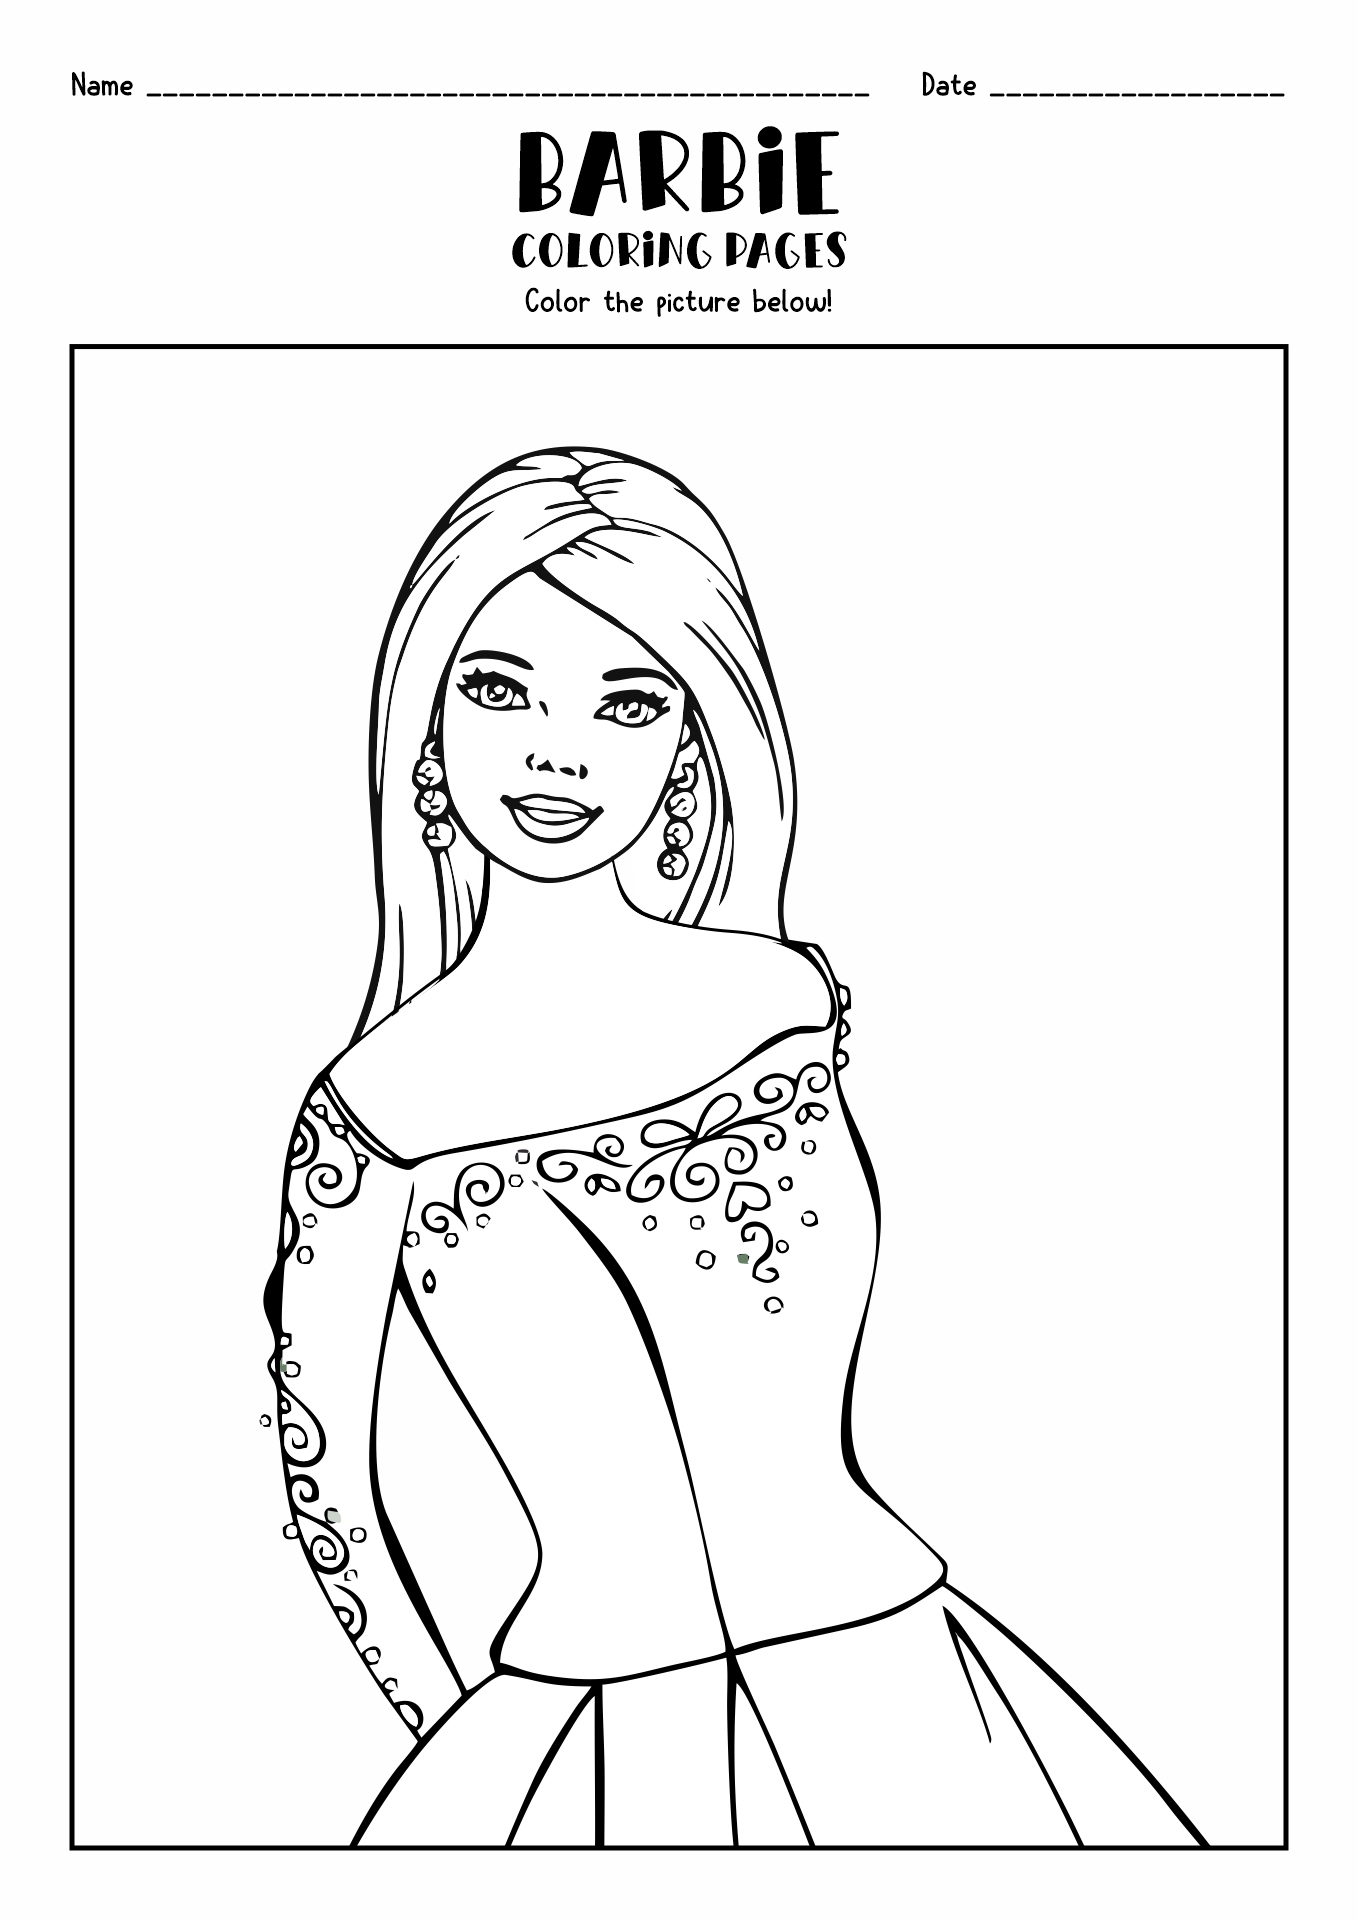 Barbie Coloring Pages Print Image